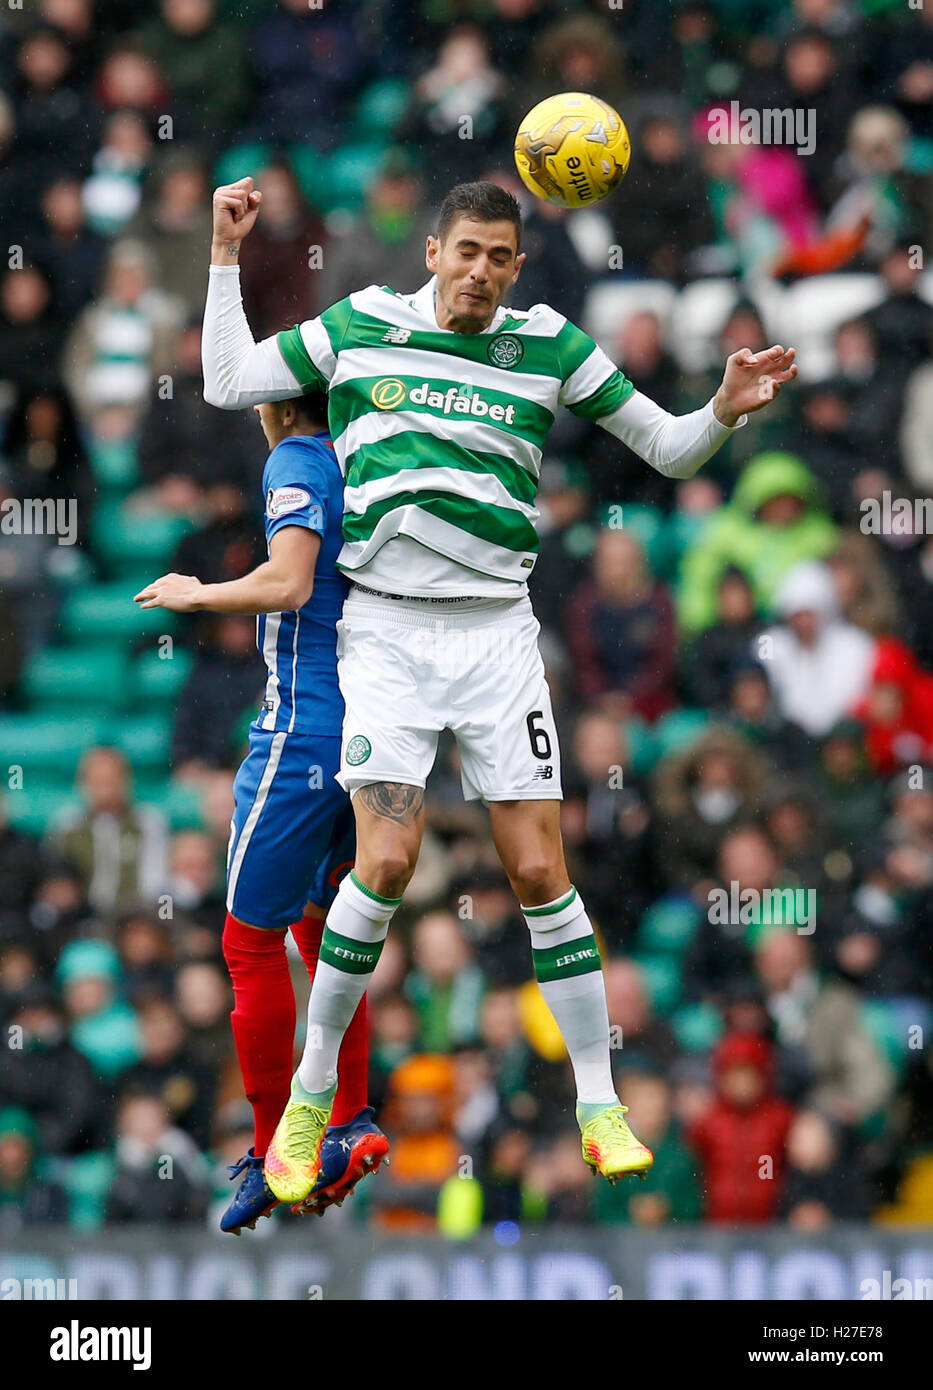 Celtic's Nir Bitton heads the ball in the air during the Ladbrokes Scottish Premiership match at Celtic Park, Glasgow. PRESS ASSOCIATION Photo. Picture date: Saturday September 24, 2016. See PA story SOCCER Celtic. Photo credit should read: Jane Barlow/PA Wire. Stock Photo